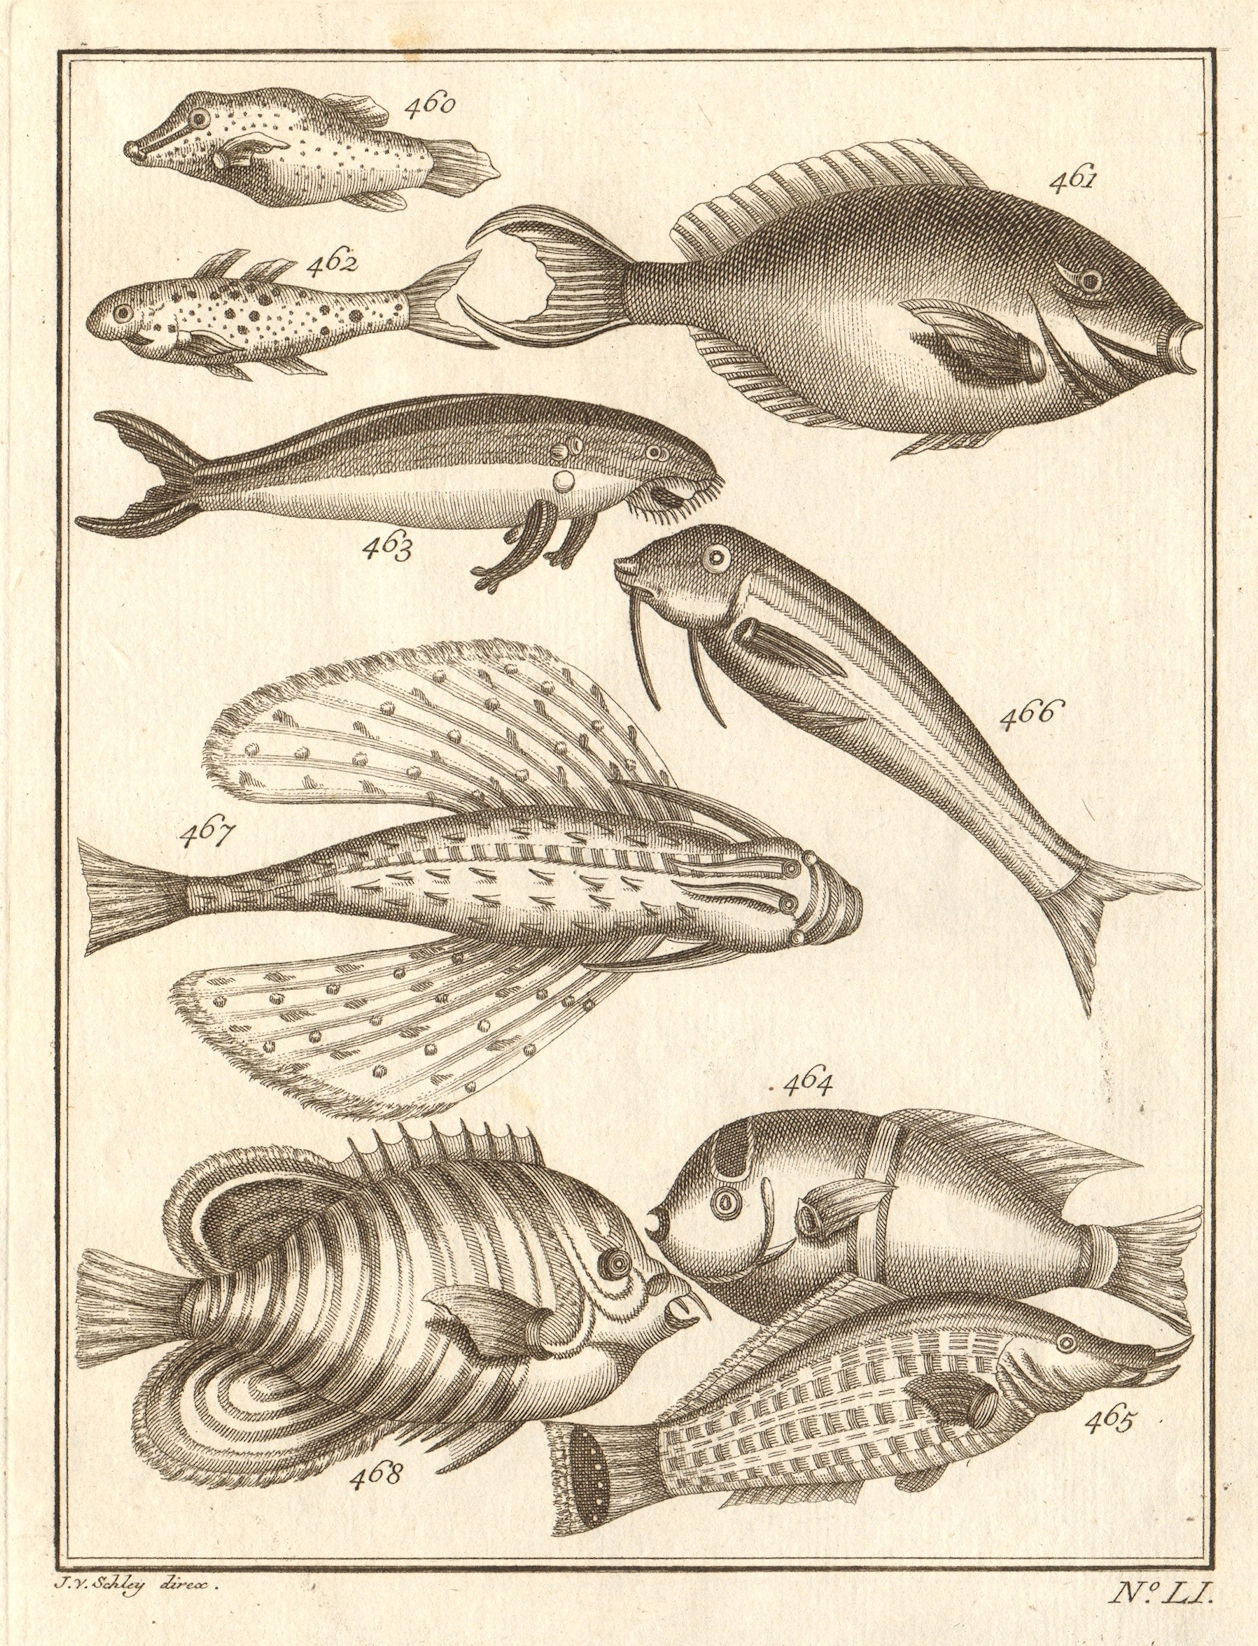 LI. Poissons d'Ambione. Indonesia Moluccas Maluku tropical fish. SCHLEY 1763